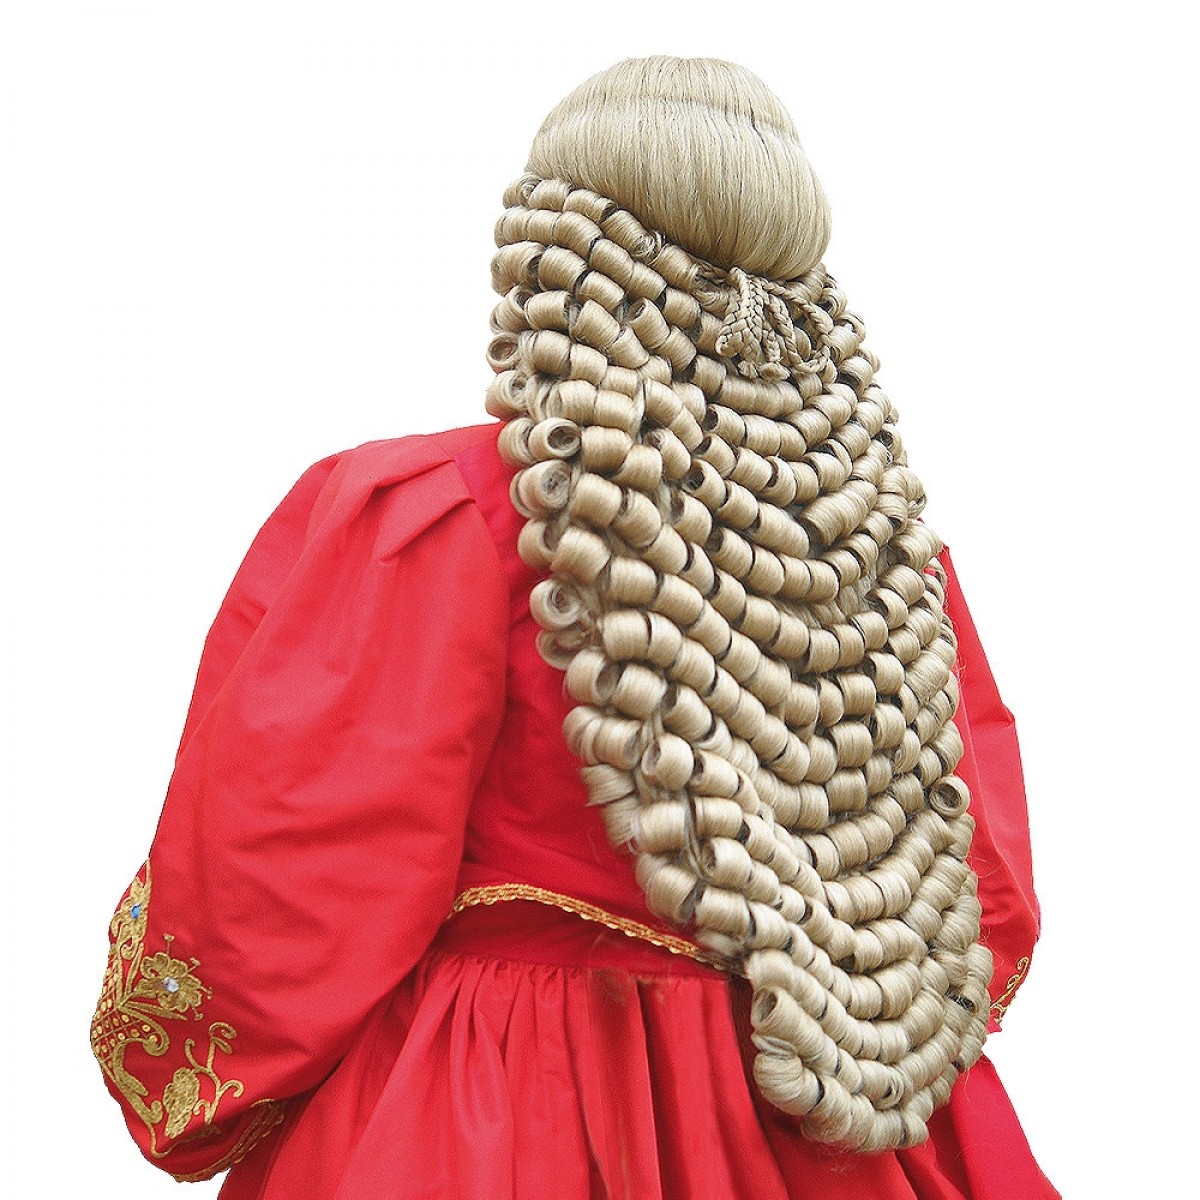 Wigs for Statues